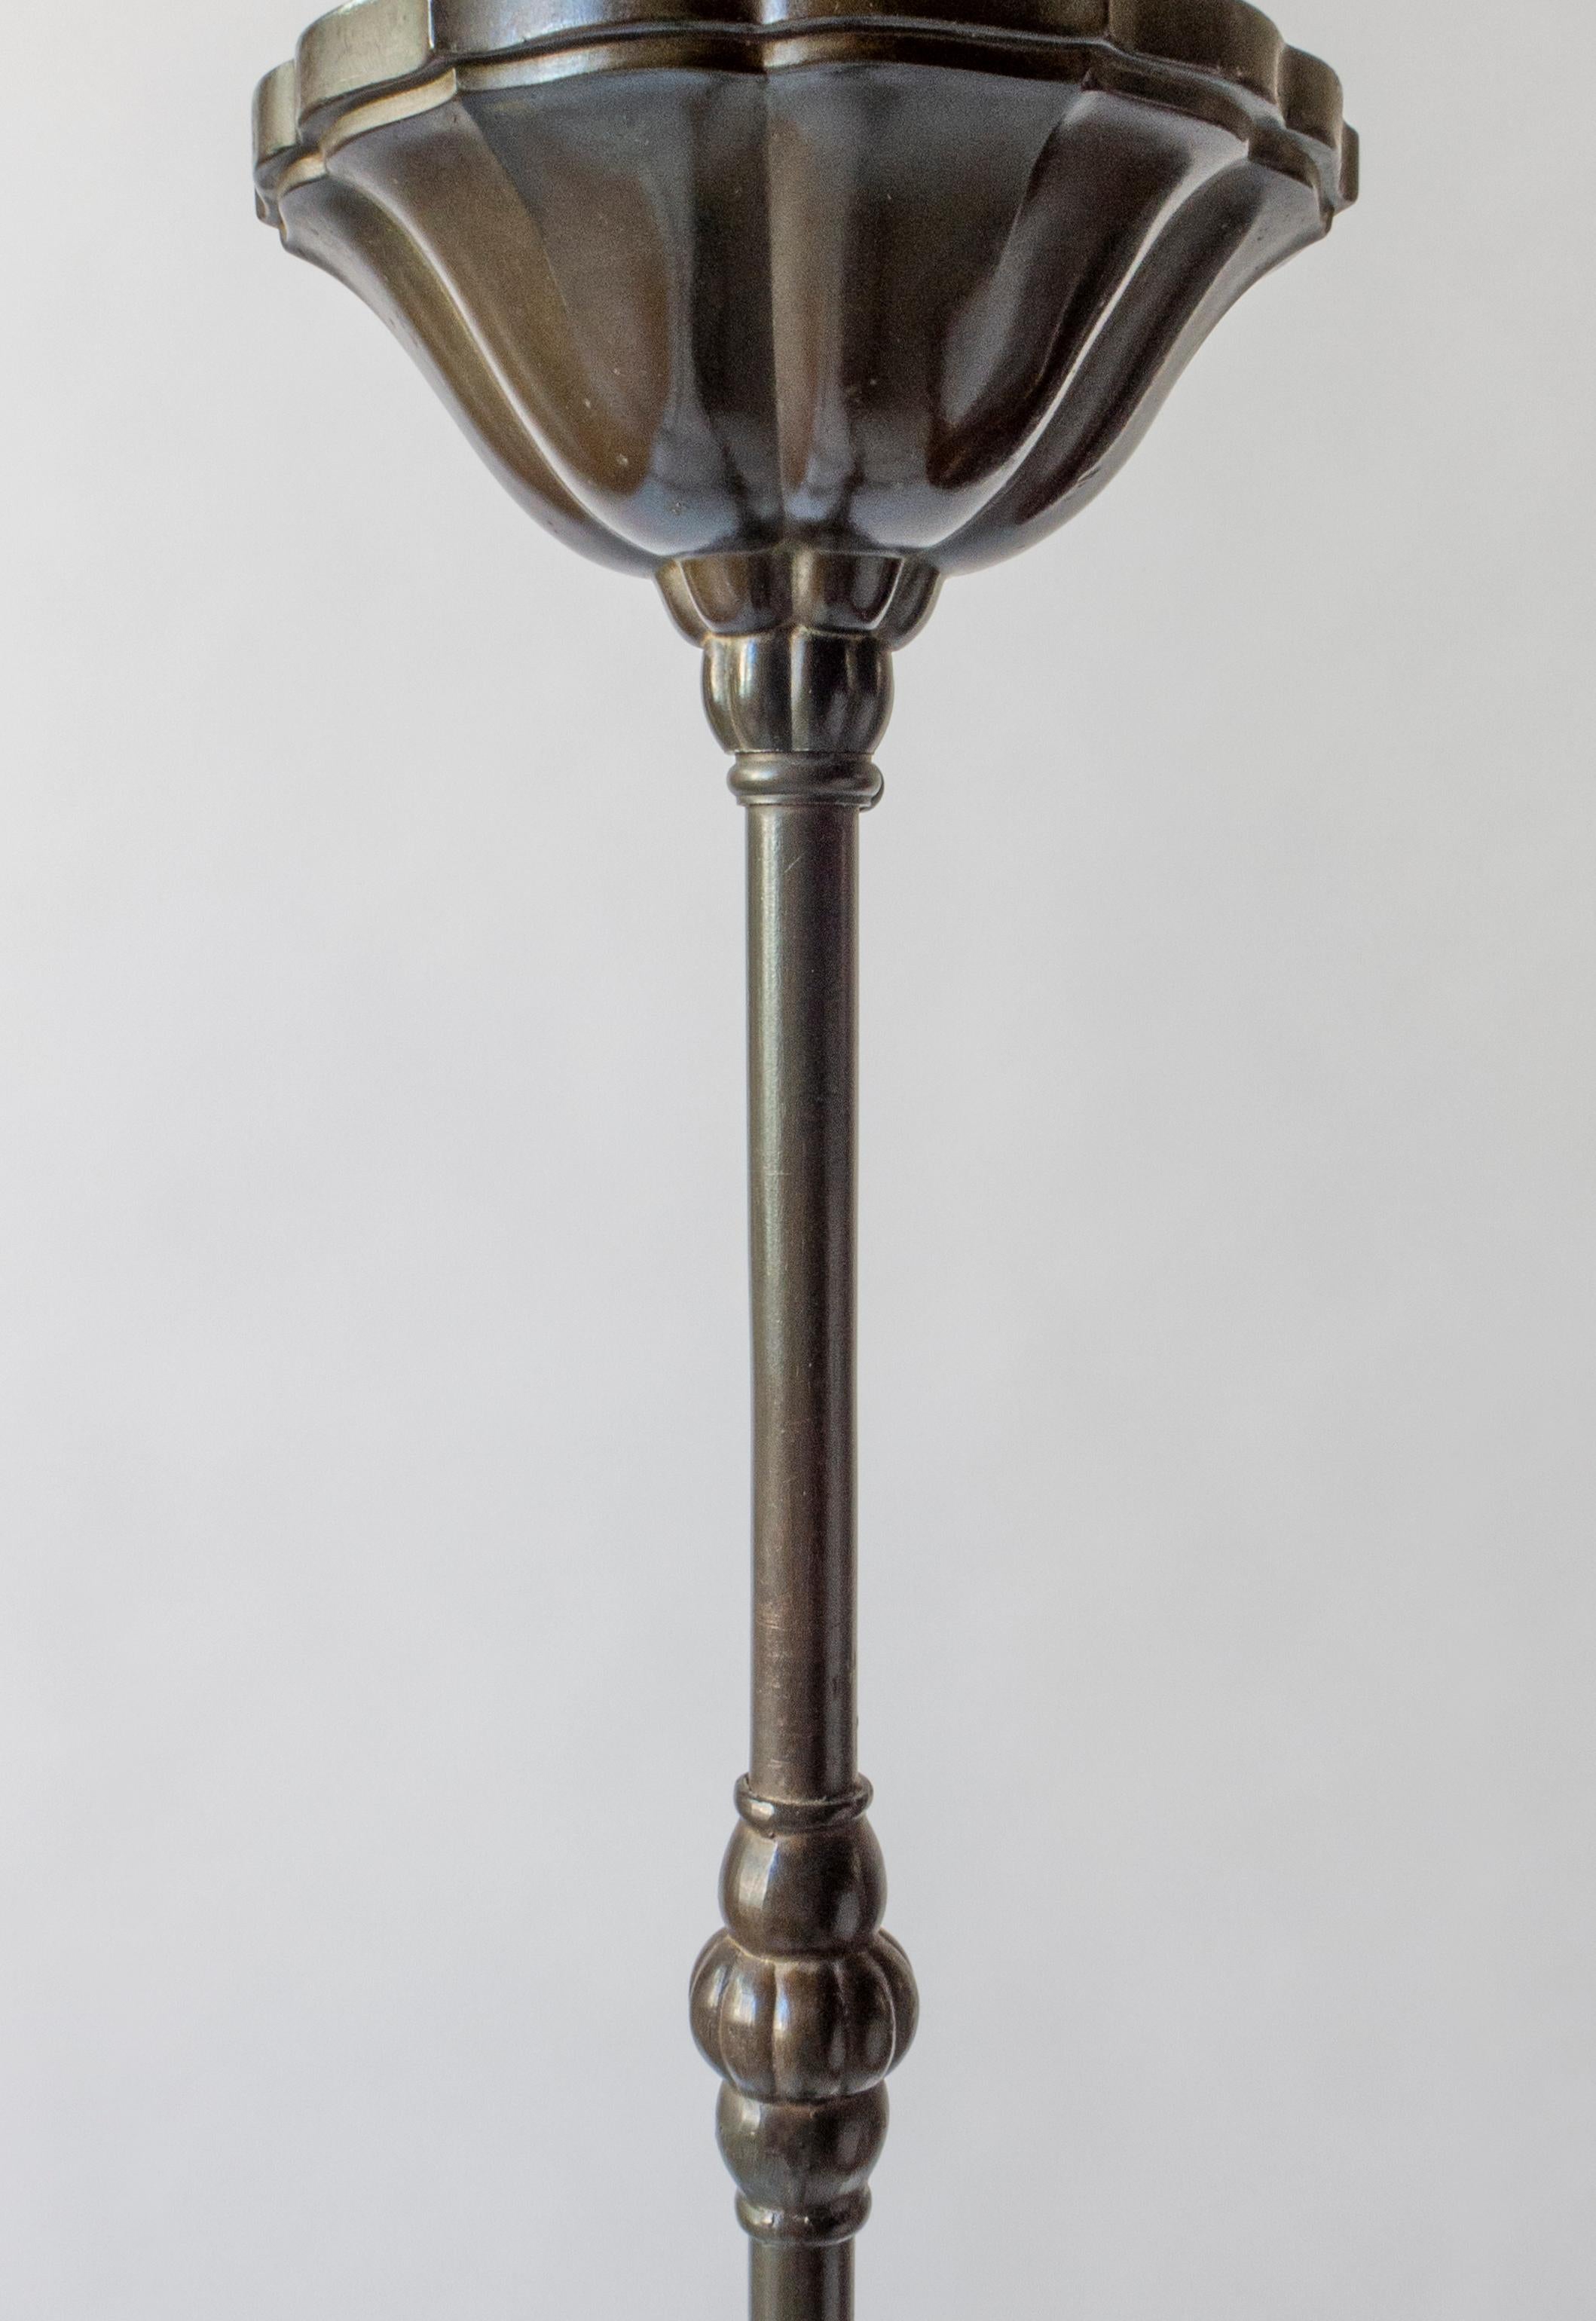 The scalloped canopy, above a bisected hanging rod with bun-form fastener, the gourd shaped body sprouting three C-shaped arms, each arm surmounted by a glass sheathed light holder, terminating in a cone shaped finial. Marked on the interior of the